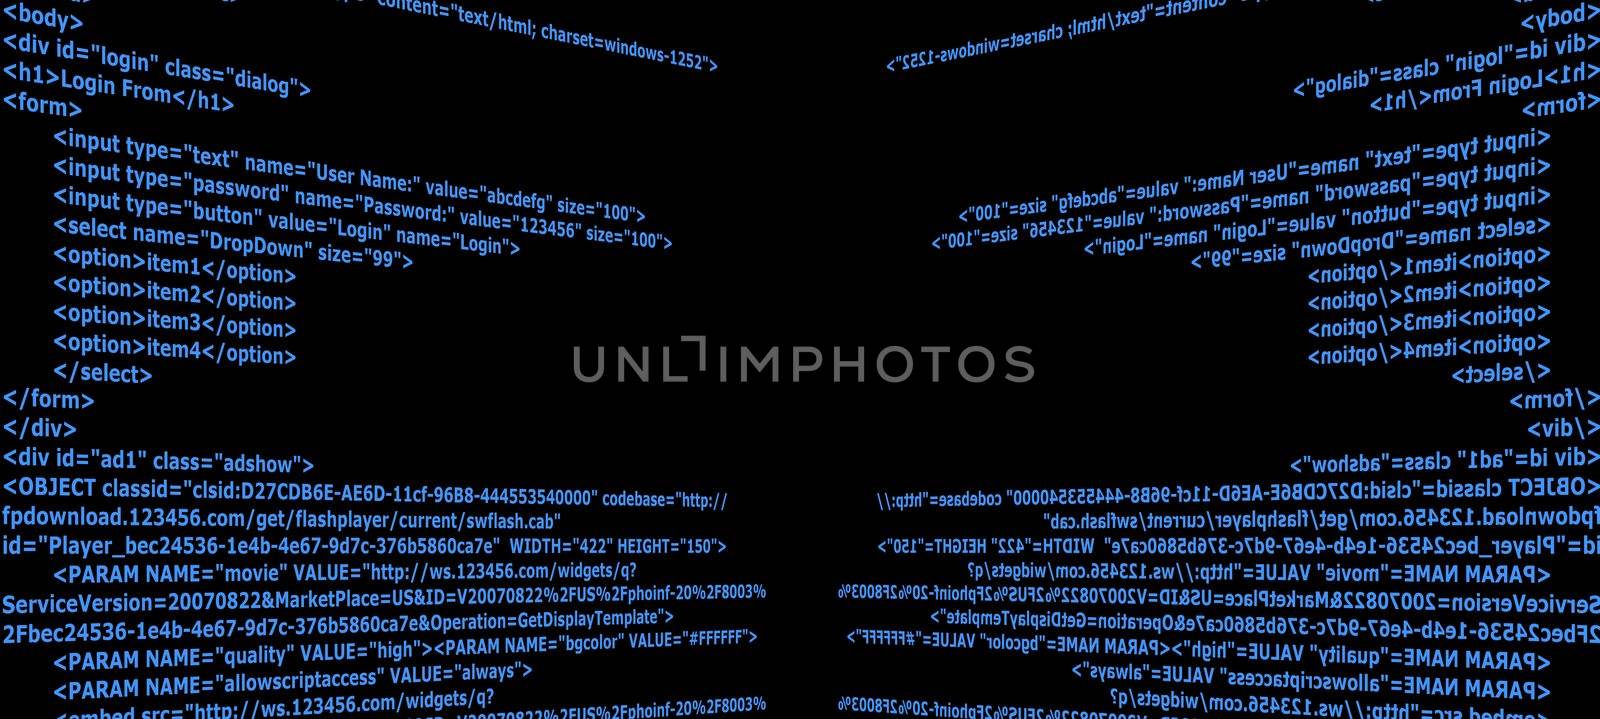 Blue Html code text with black background